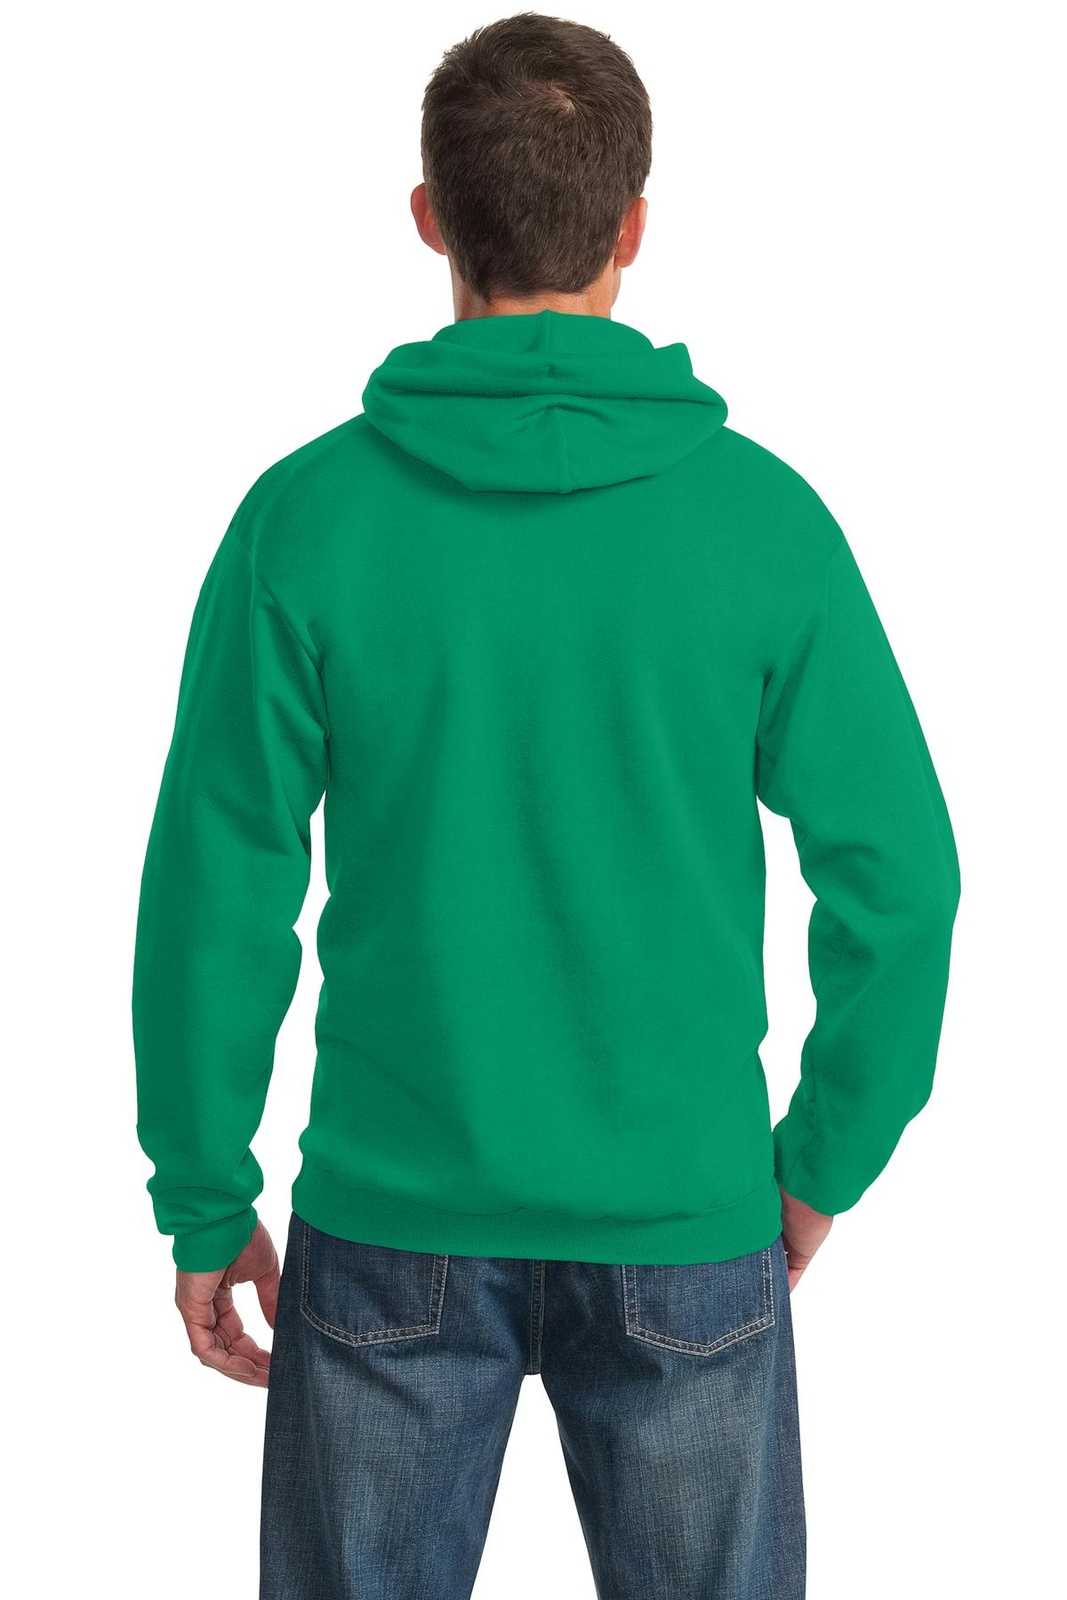 Port & Company PC90H Essential Fleece Pullover Hooded Sweatshirt - Kelly Green - HIT a Double - 1